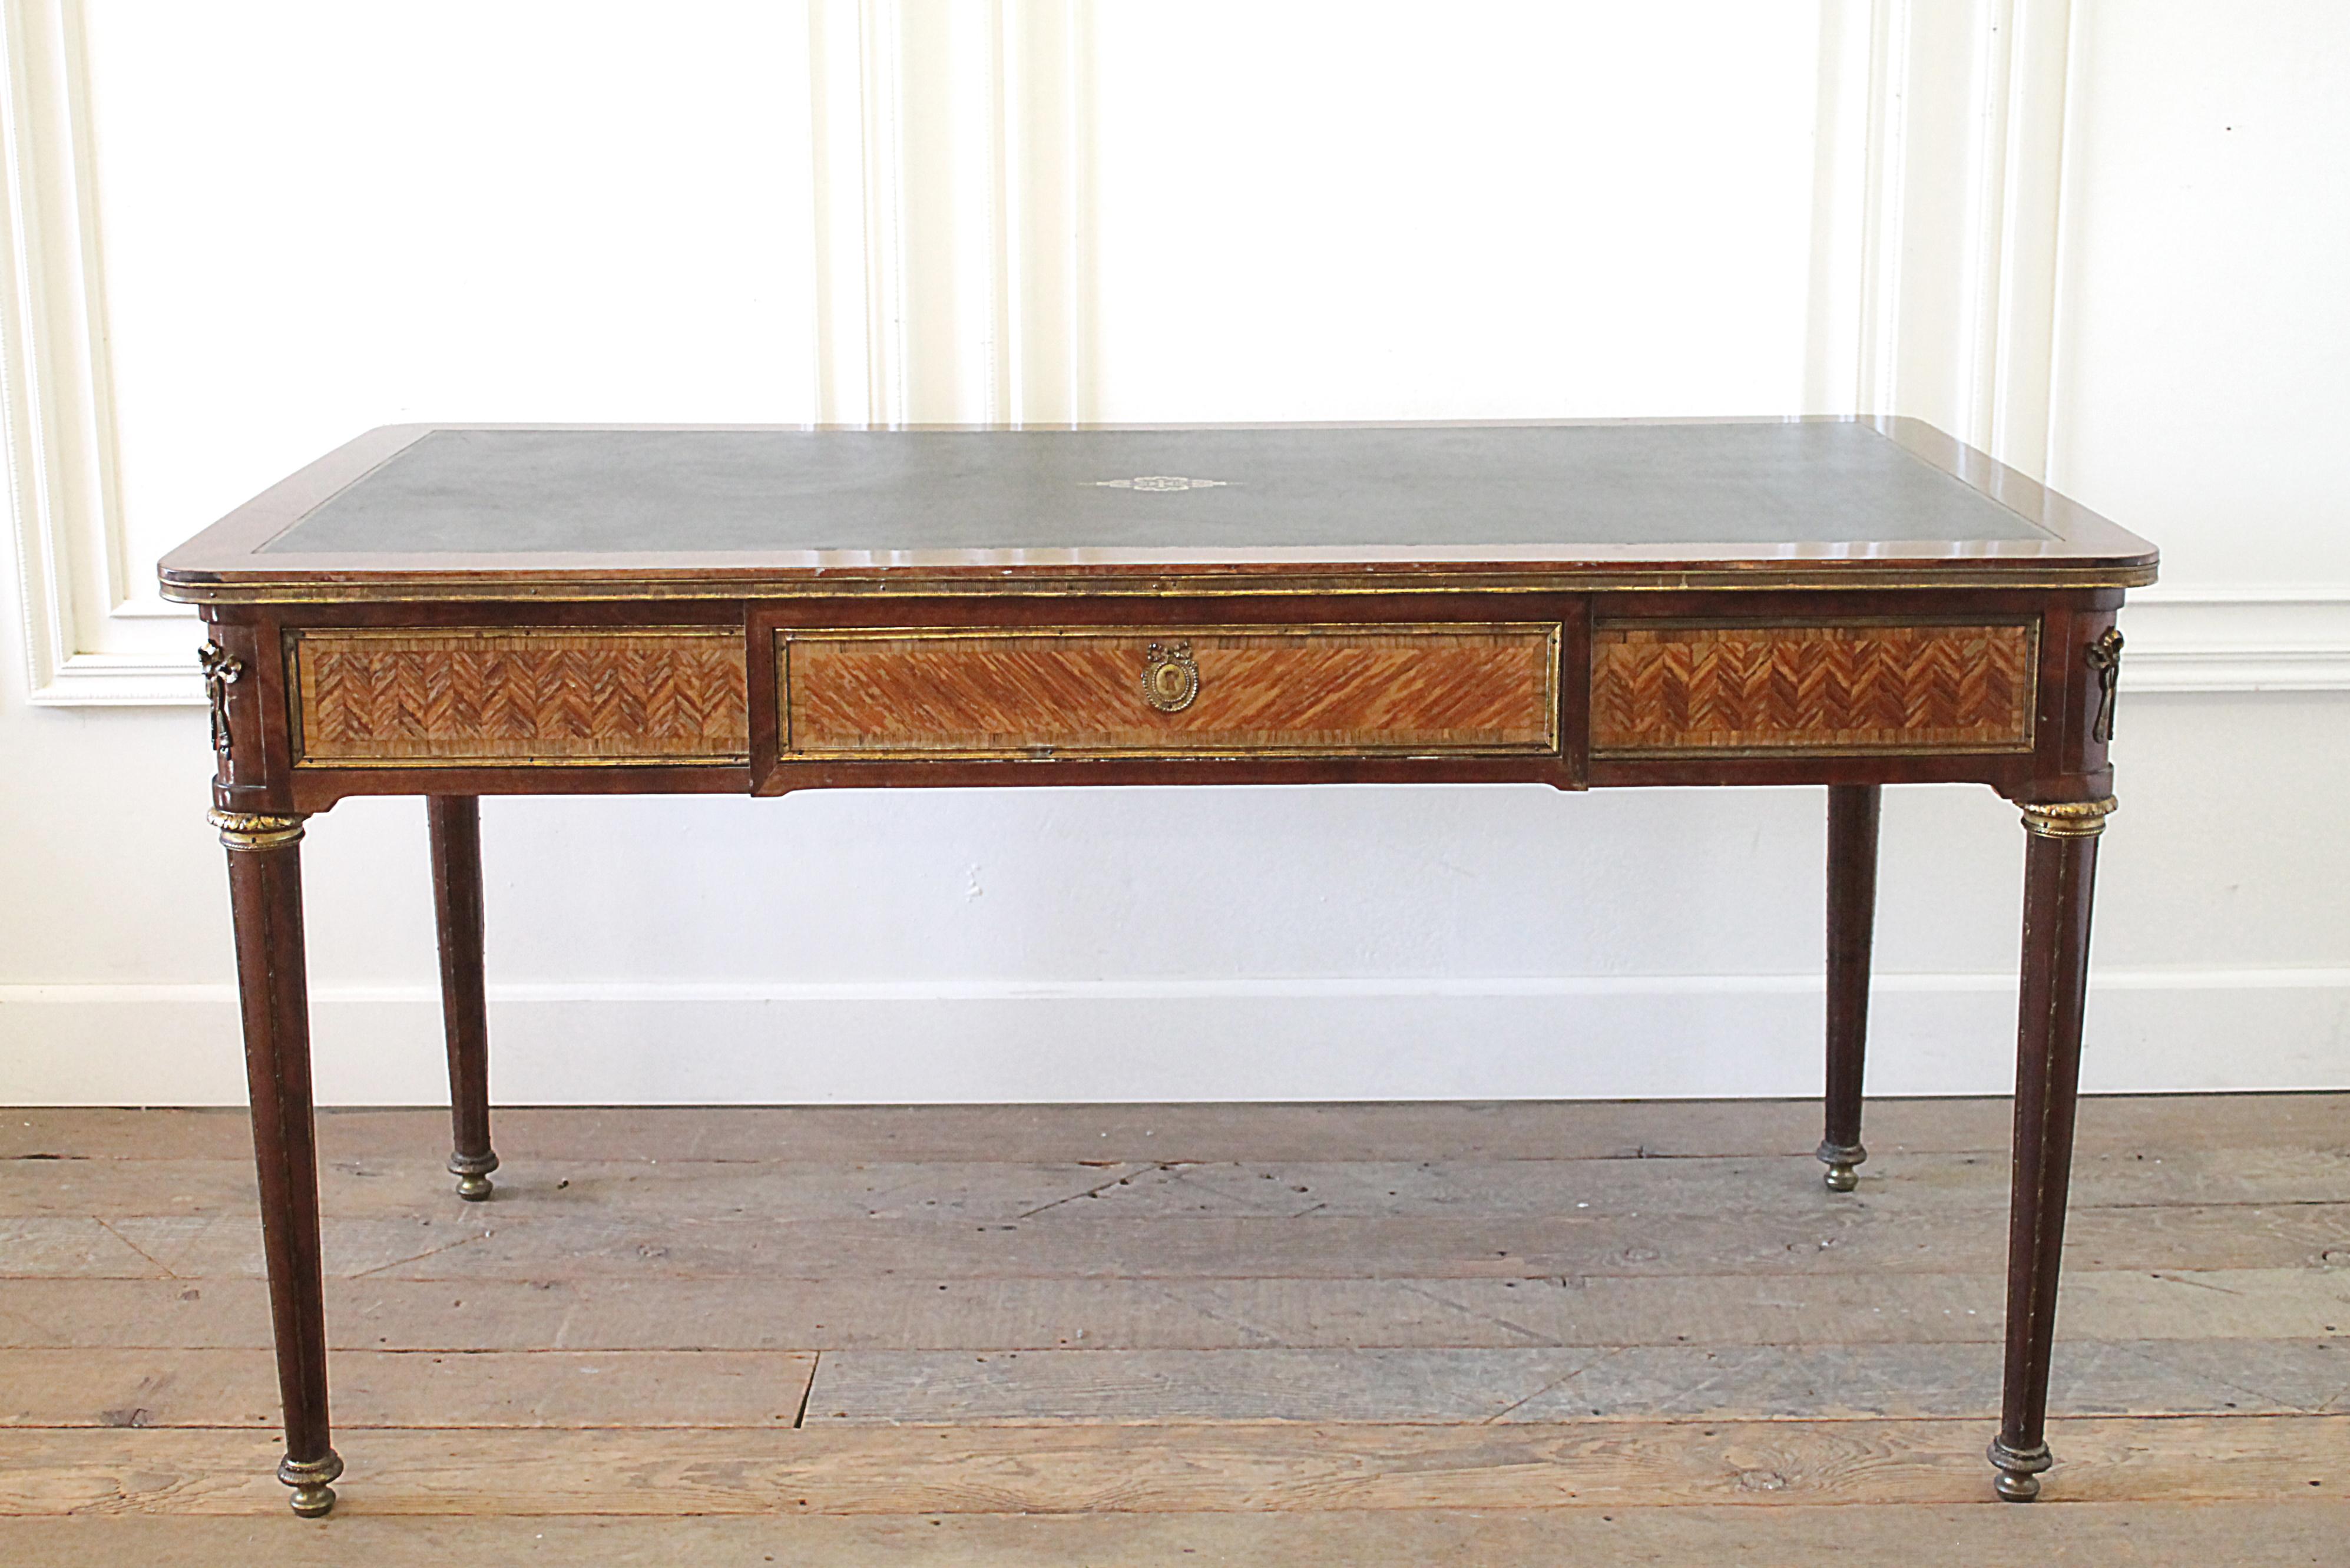 19th century wood inlay Louis XVI style leather top desk
This desk has beautiful chevron style wood inlays, and bronze mounted ormolu ribbons on the corners. Decorative bronze caps at the top of the legs, and feet, as well as down the flutes of